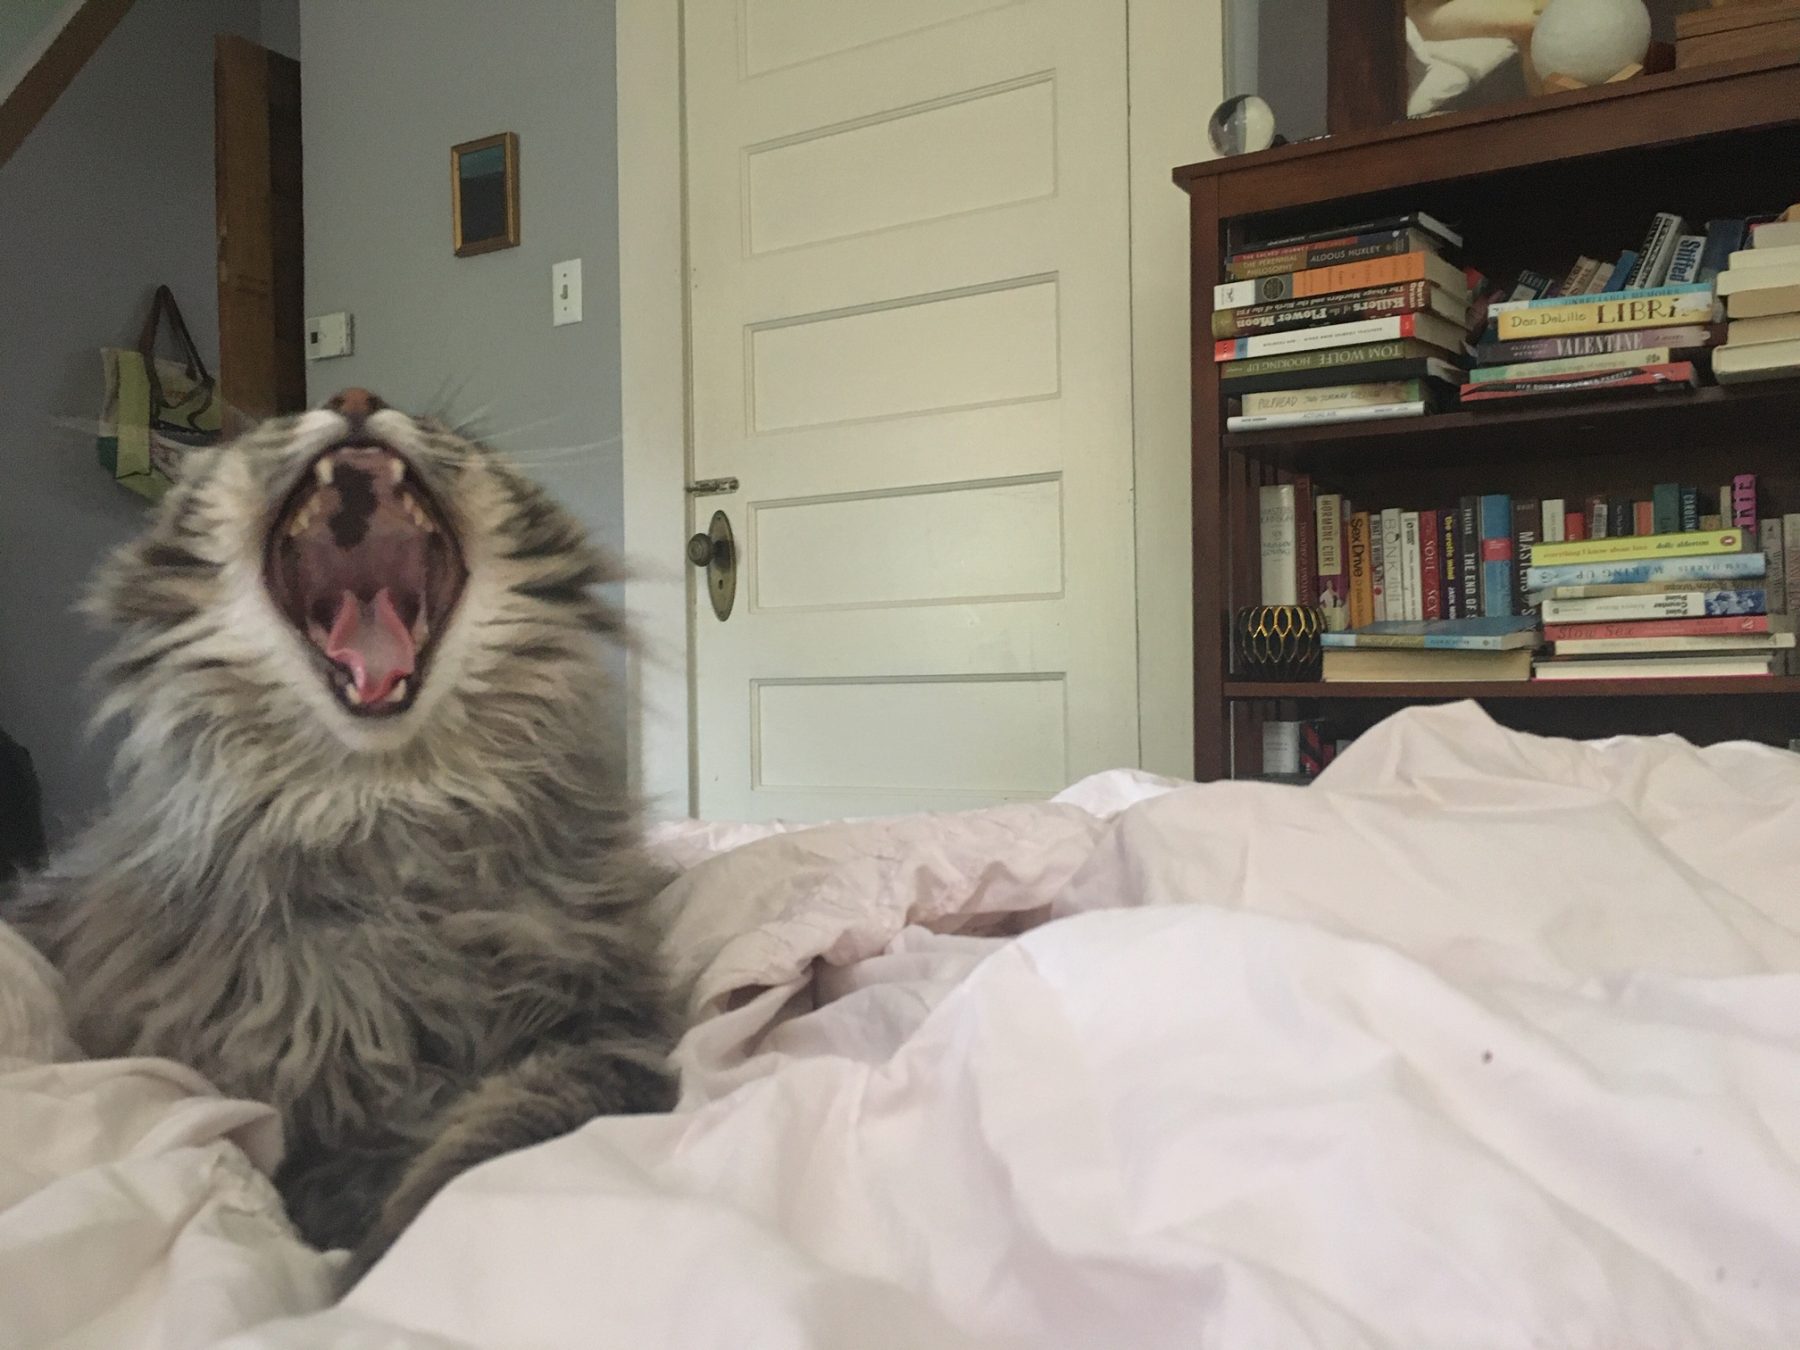 A gray cat opens its mouth